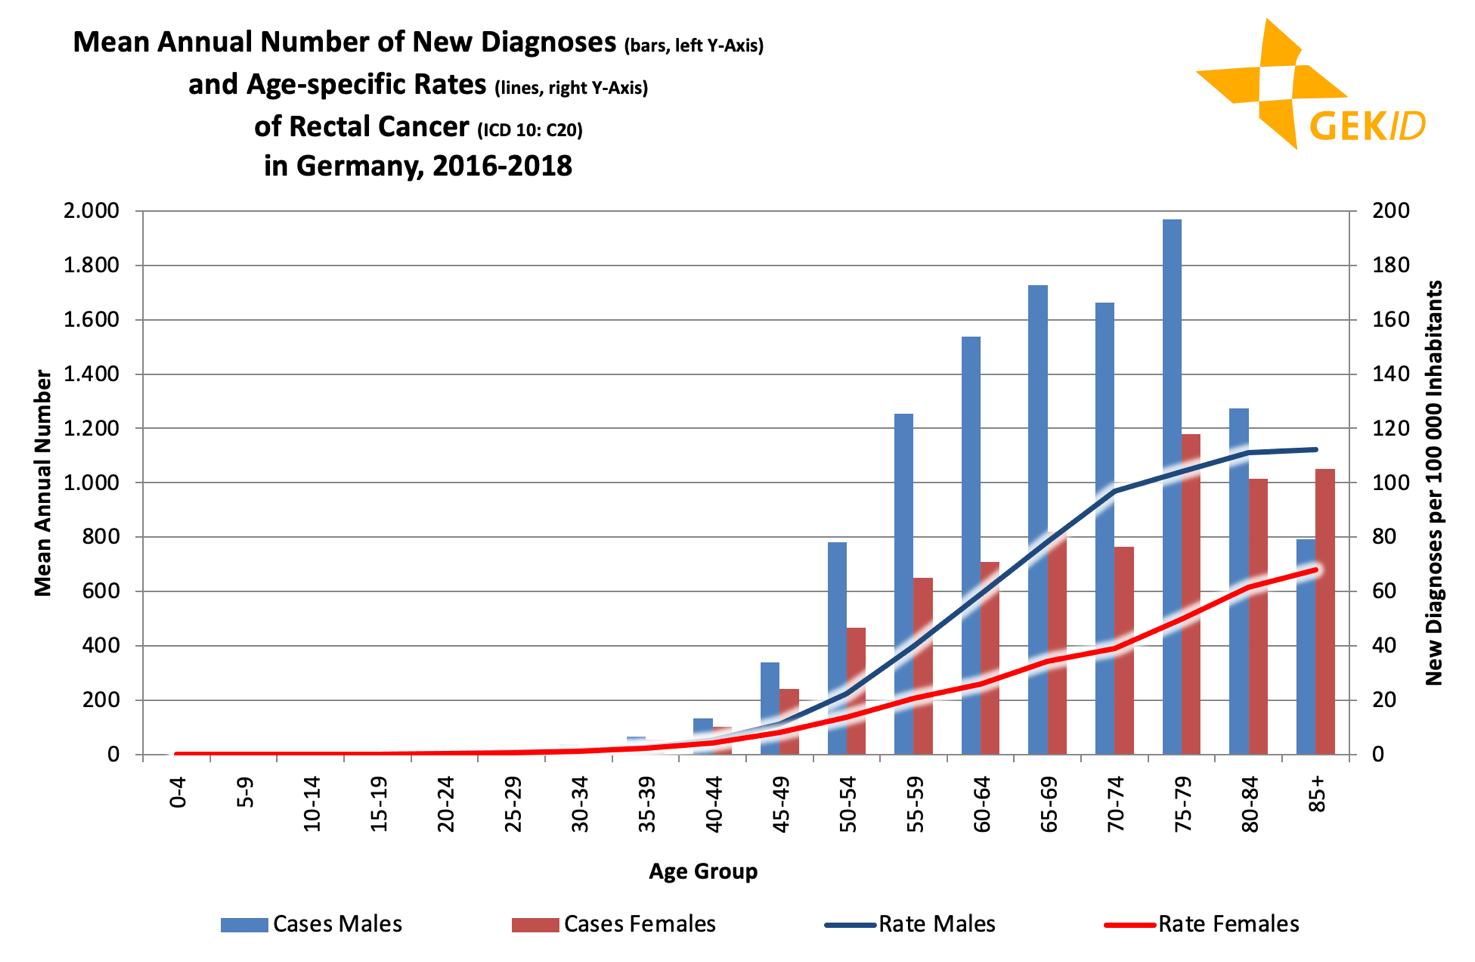 Age distribution of incidence of malignant neoplasms of the rectum (ICD 10: C20) - age-specific numbers of cases and rates 3